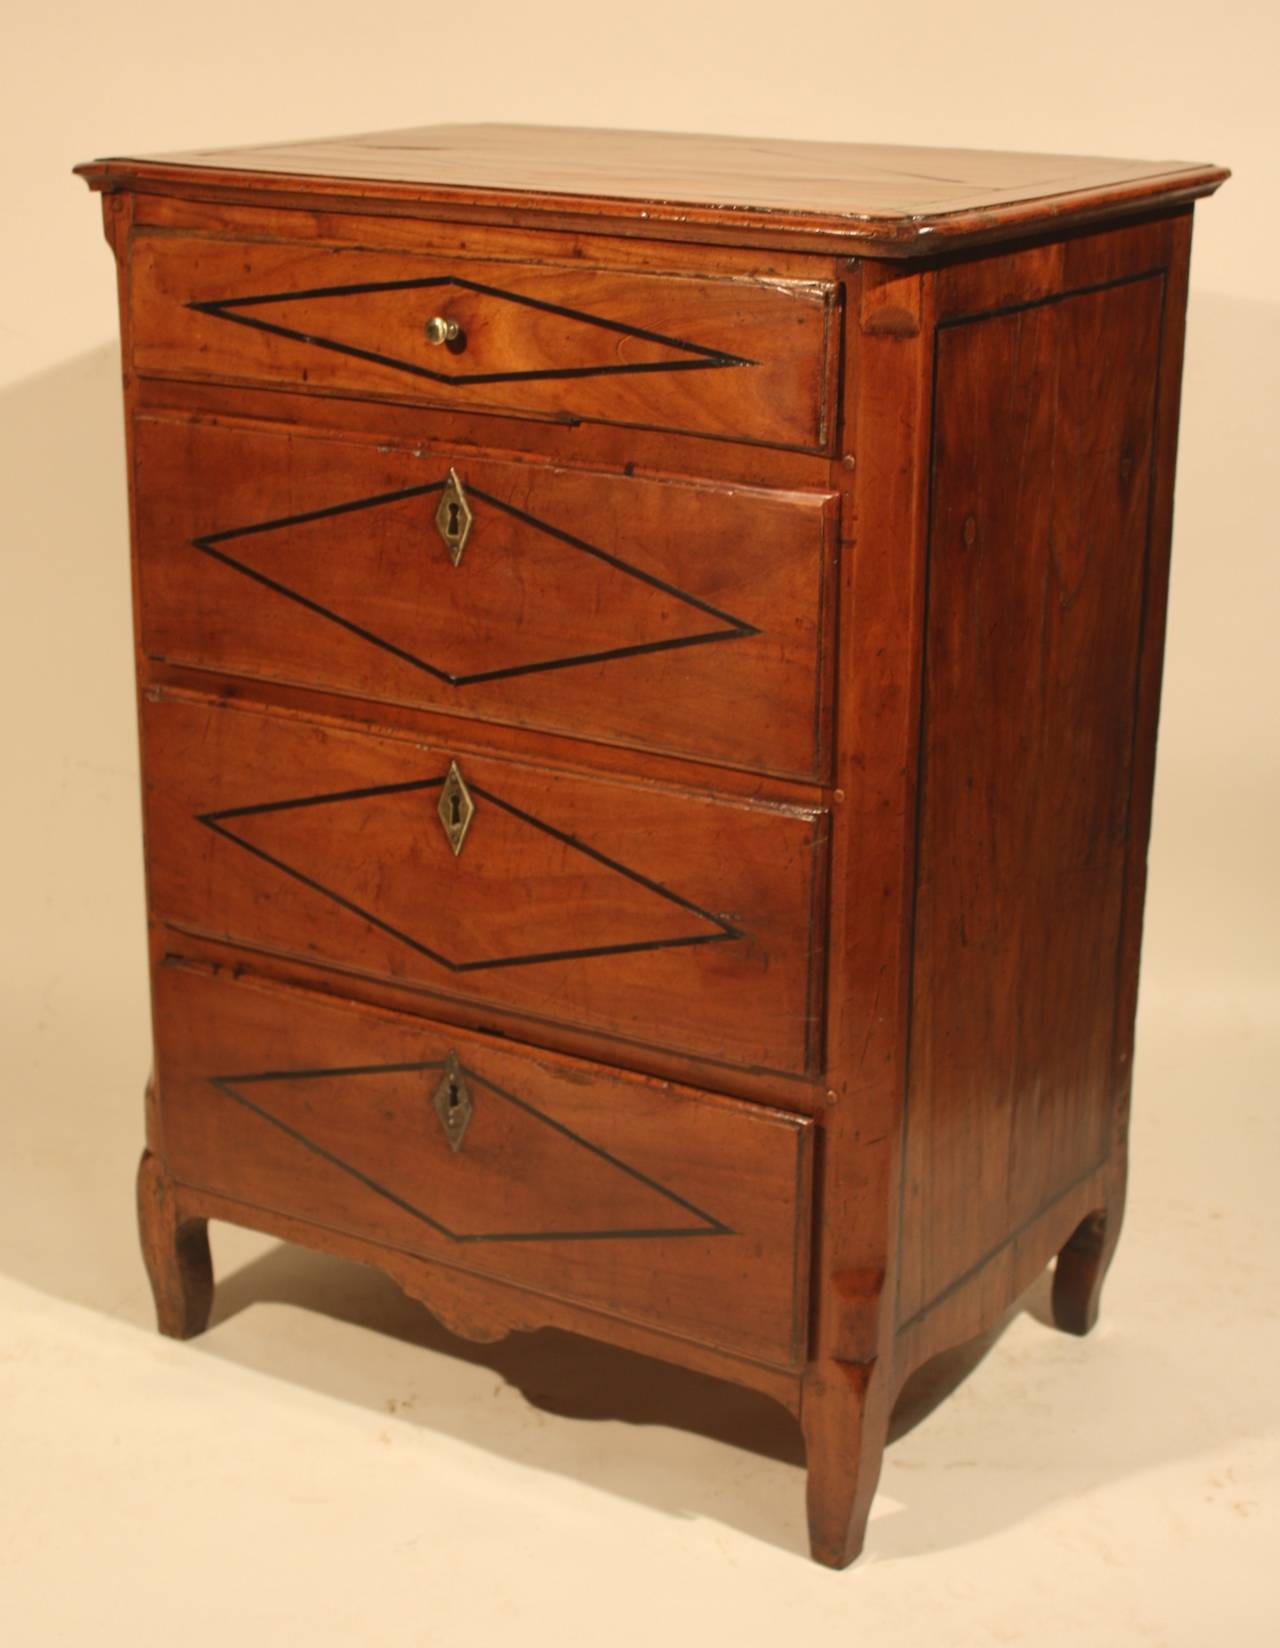 A charming petite commode the perfect size for a bedside stand from the Directoire period circa 1800, in fruitwood with inlaid ebonized diamond patterns on the drawer fronts and top. The piece retains its original hardware and lock with key.